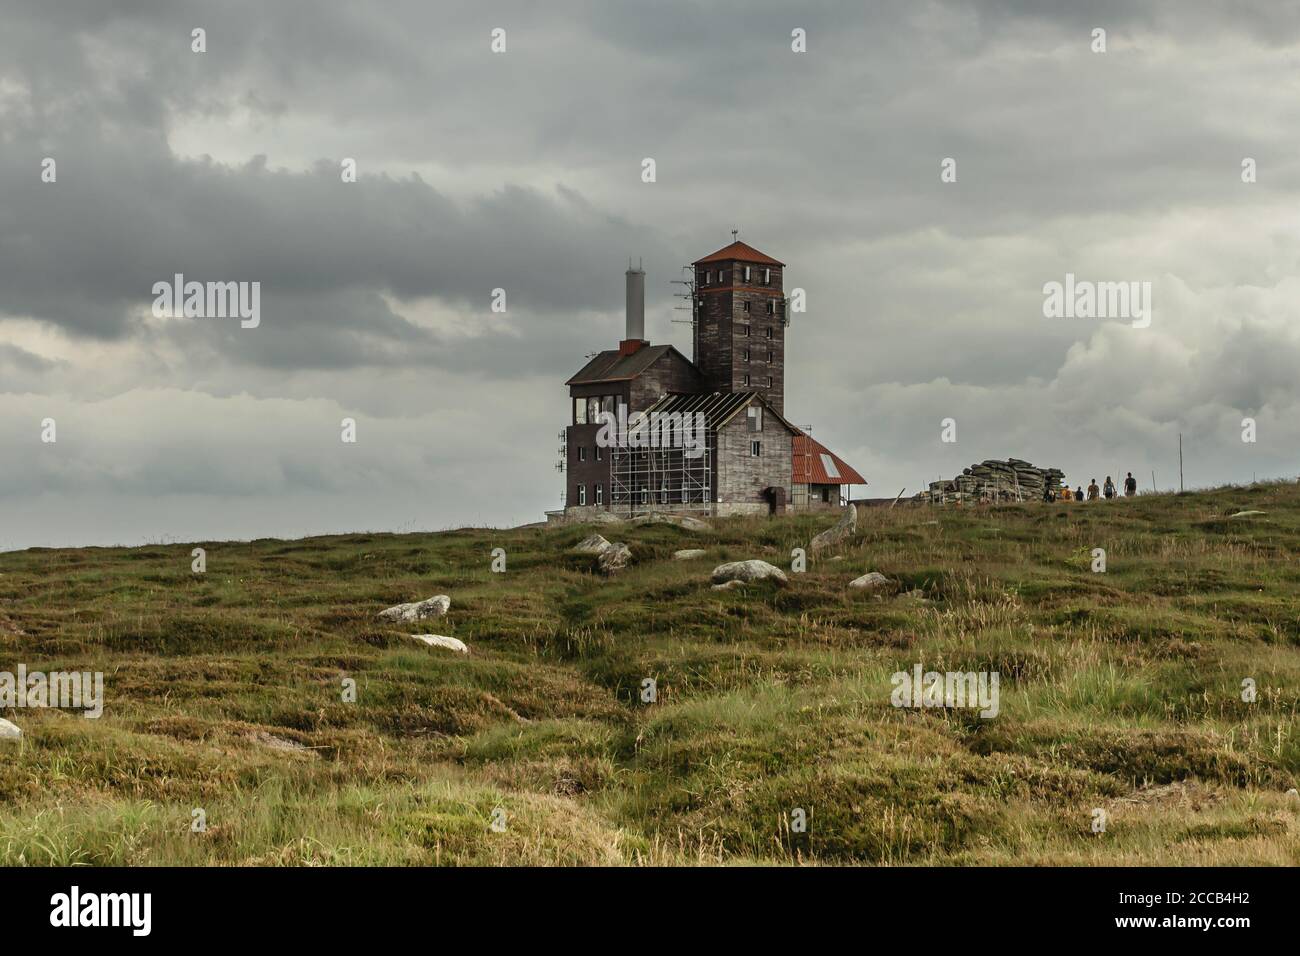 A remoted building on Polish-Czech border in Krkonose,Giant mountains.People hiking and enjoying the views.Weekend getaway active lifestyle.Travel nat Stock Photo